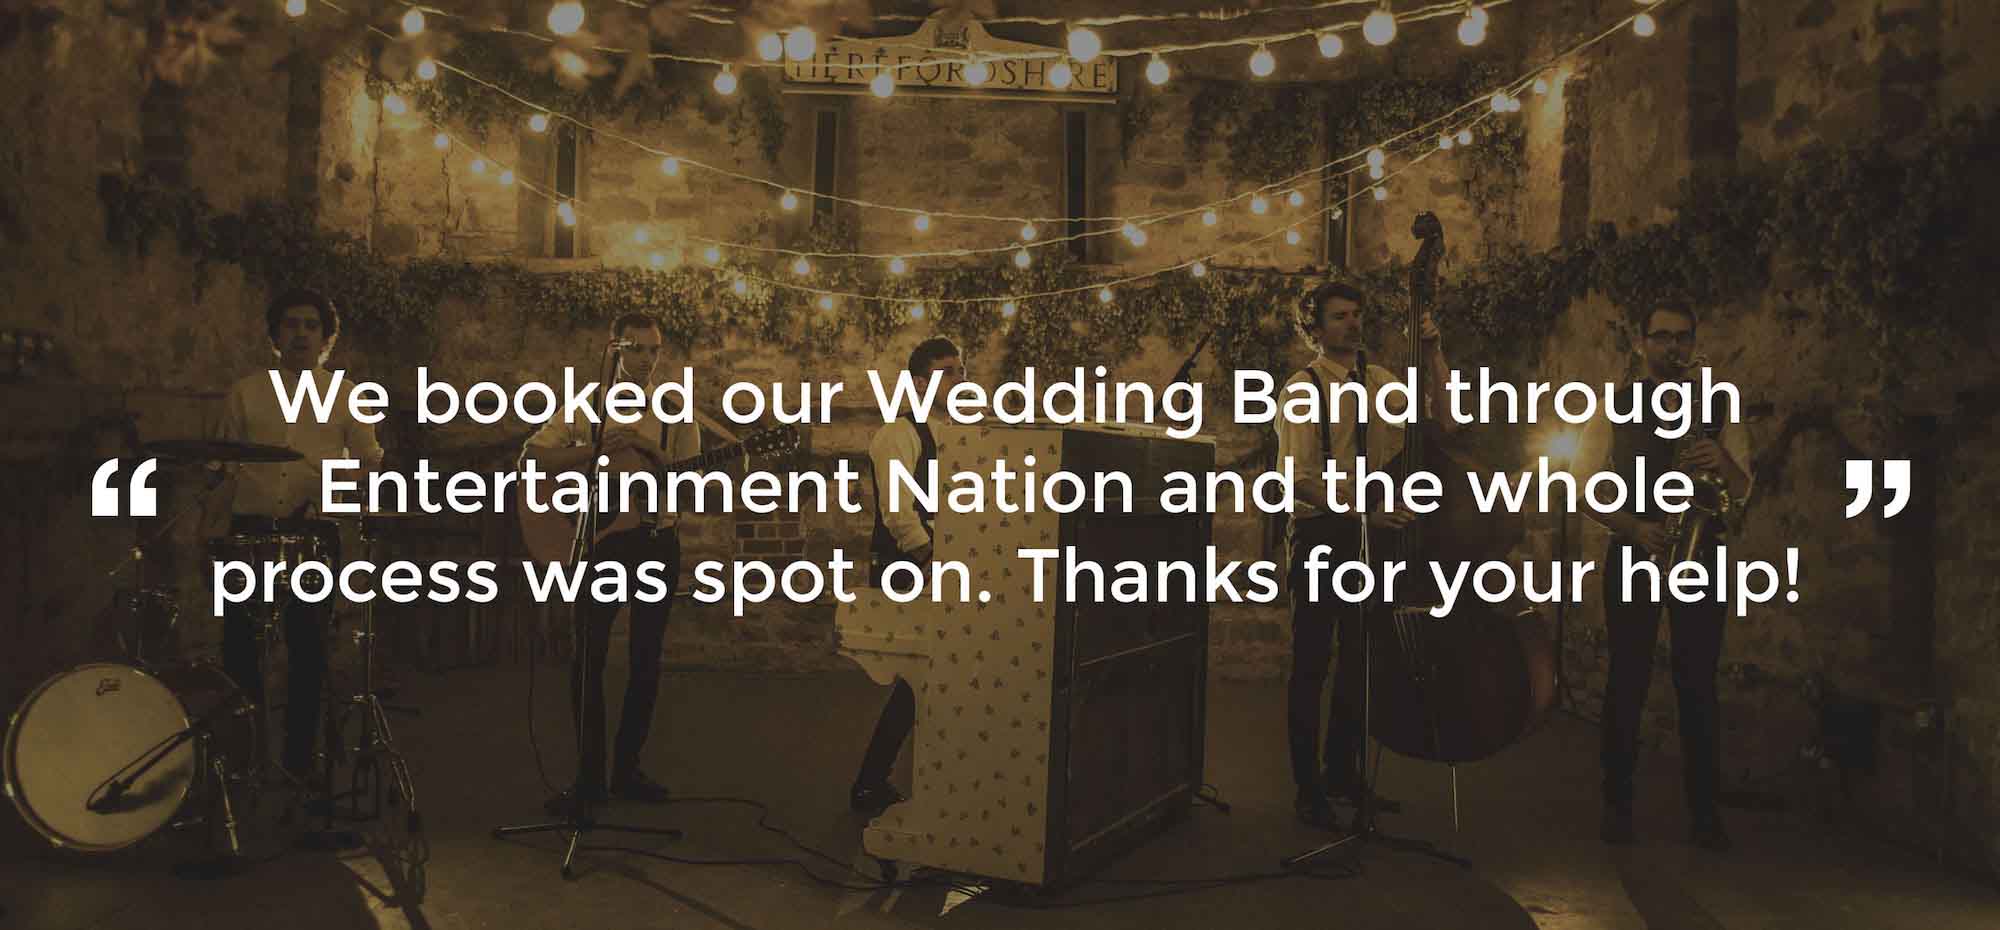 Client Review of a Wedding Band Durham